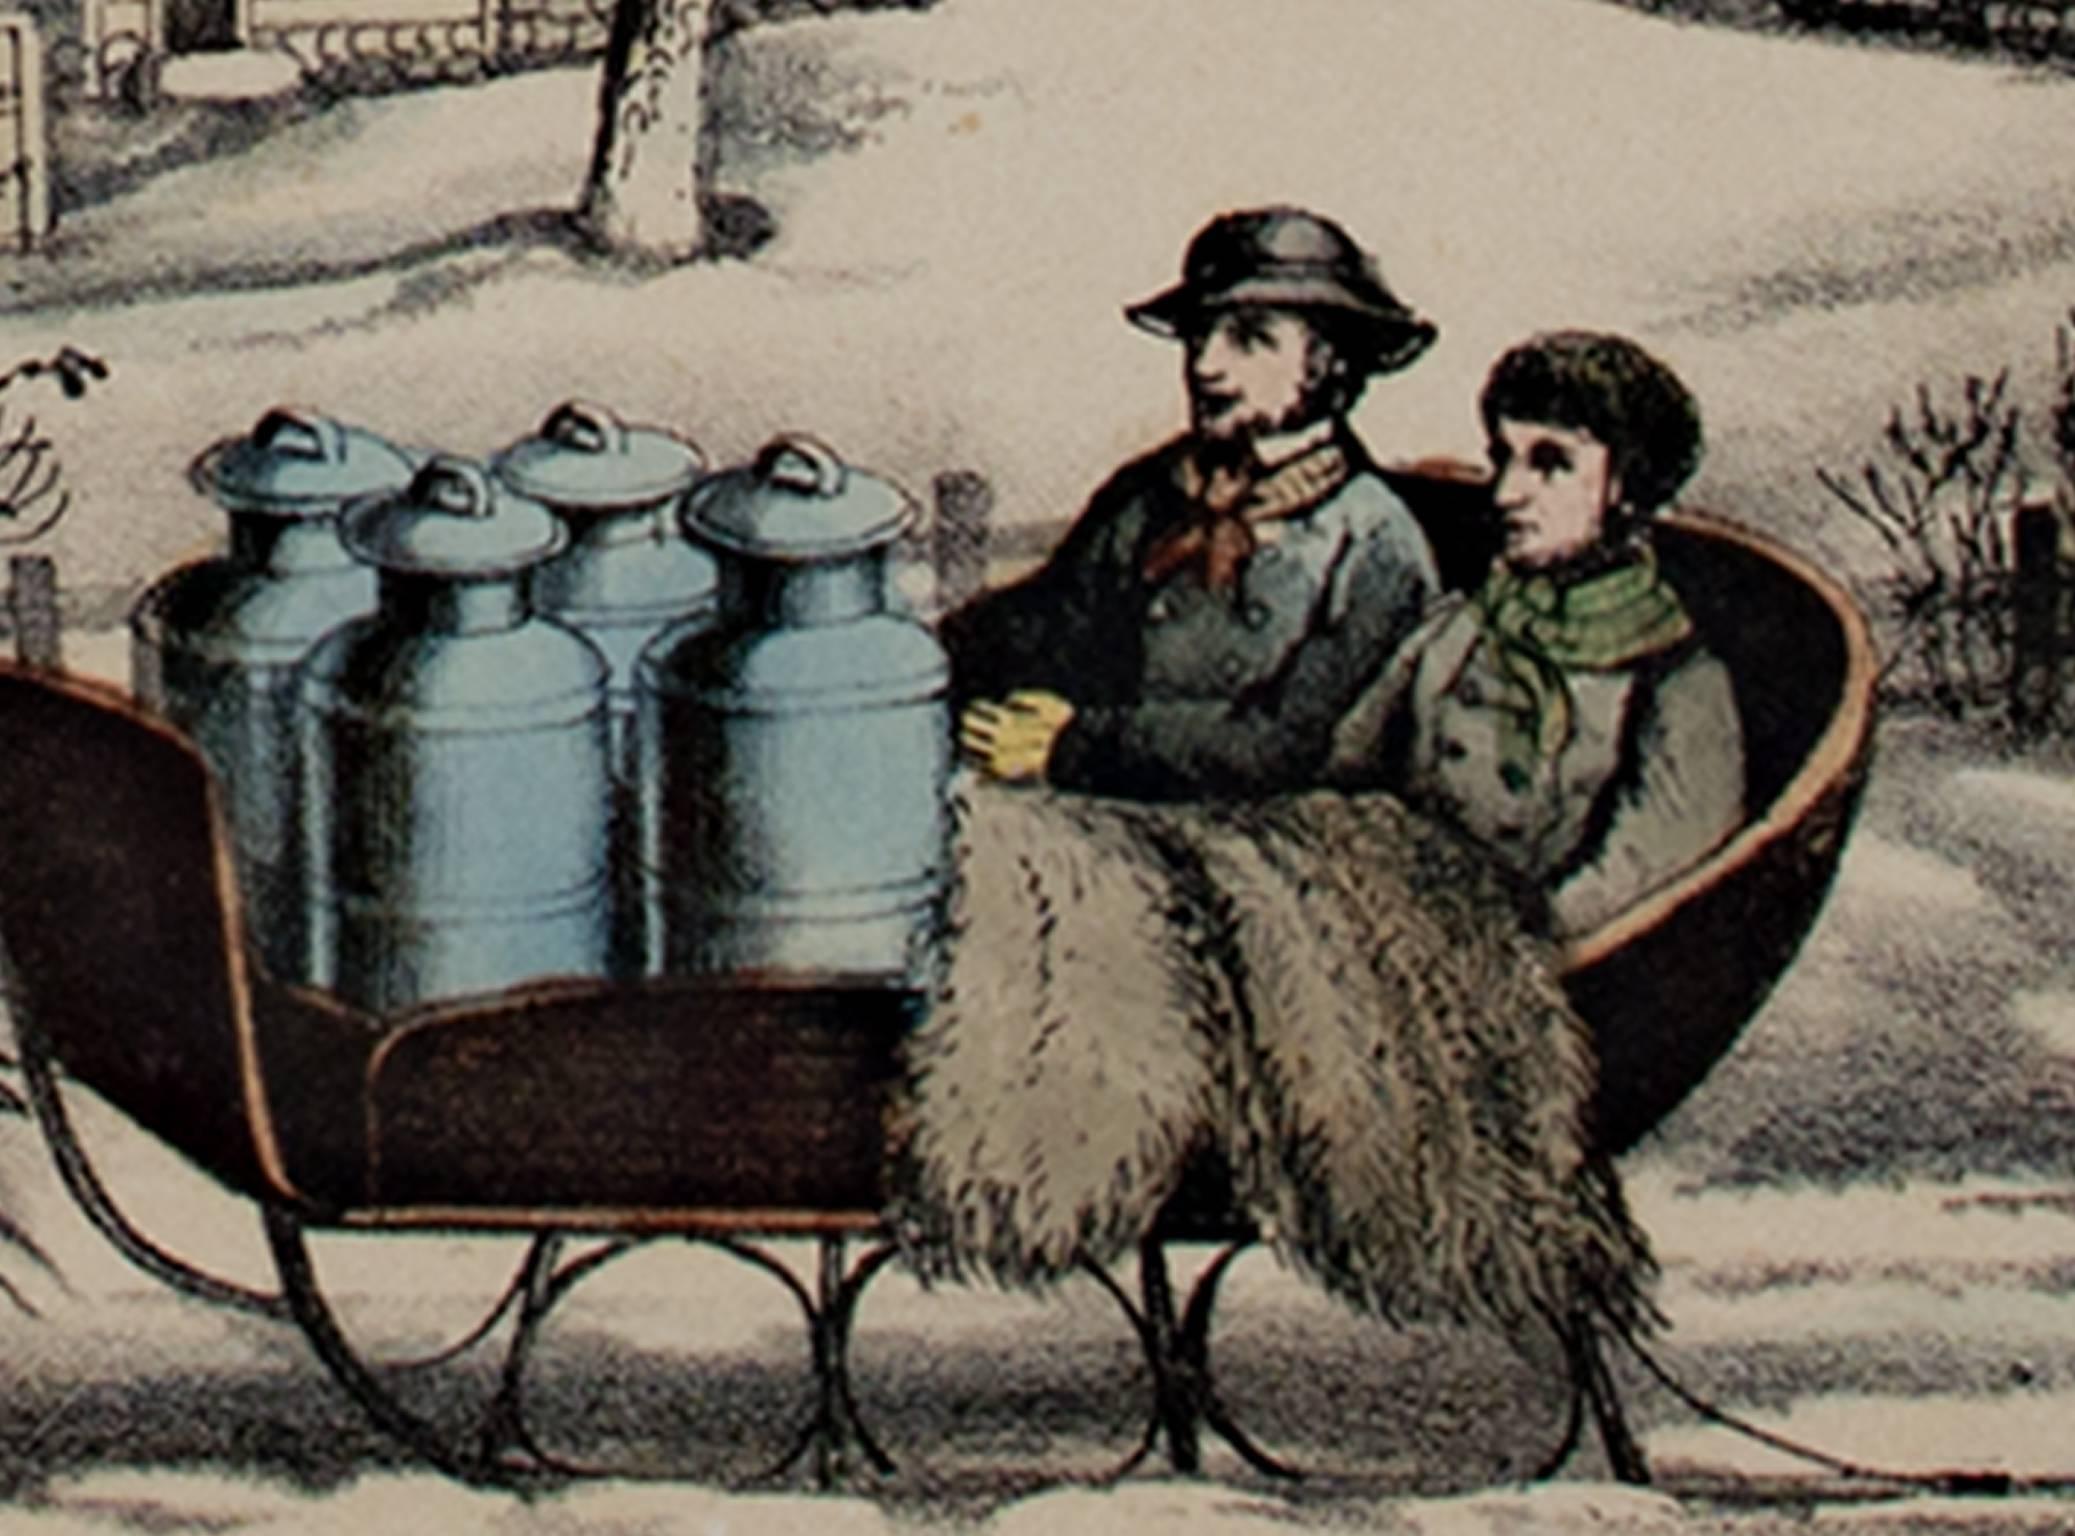 which is not one of the ways currier and ives used color in their prints